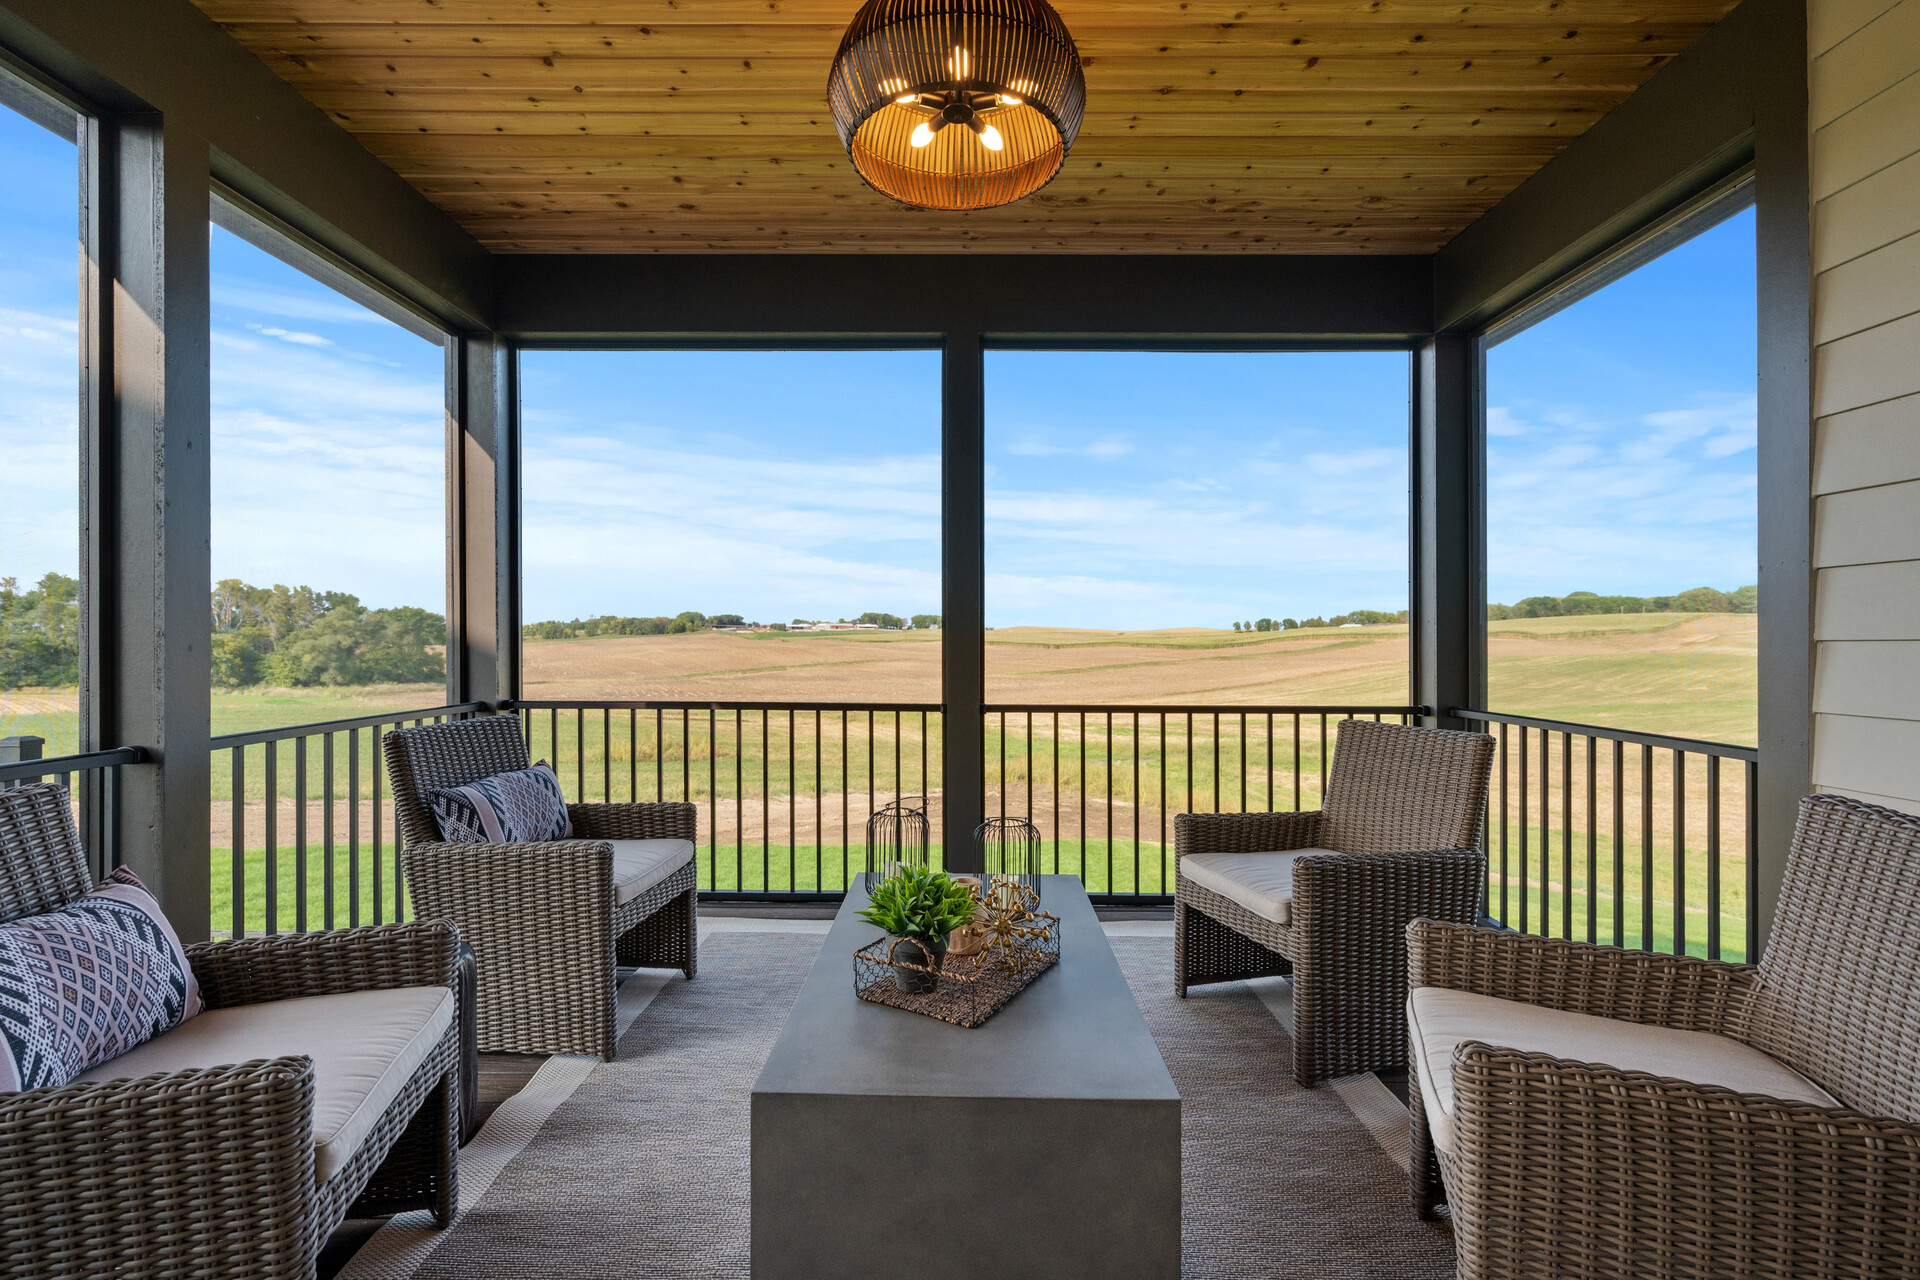 A screened porch with wicker furniture and a view of a prairie field.